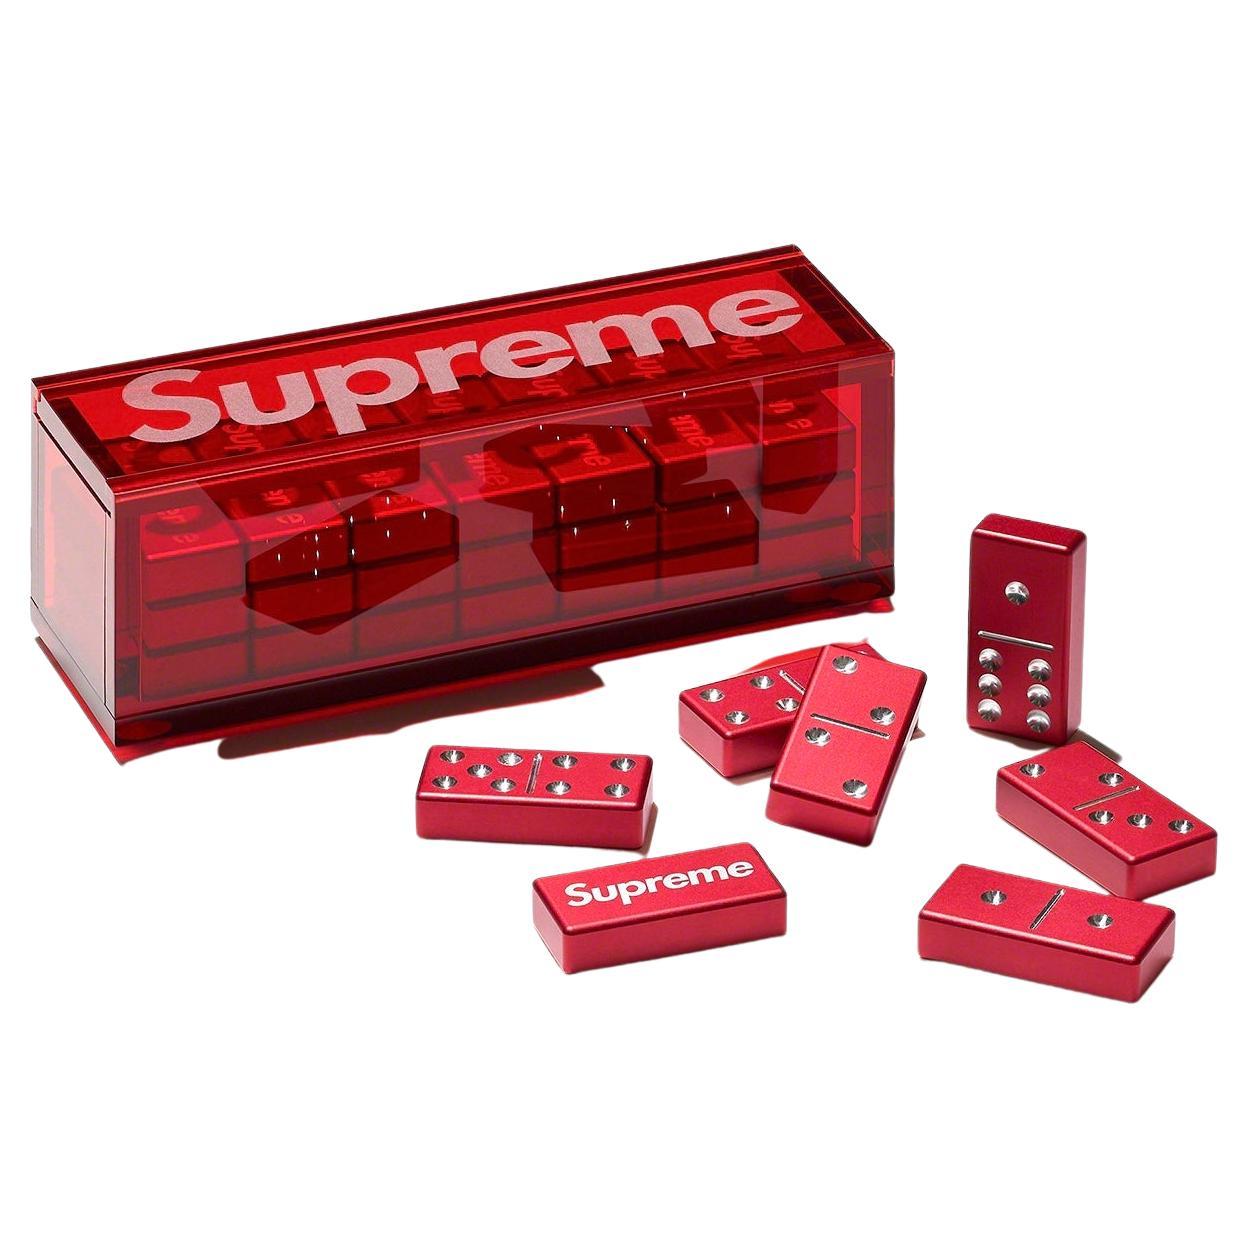 Supreme Jumbo Red Aluminum Dominoes Set with Box, Fall 2022, New in Box